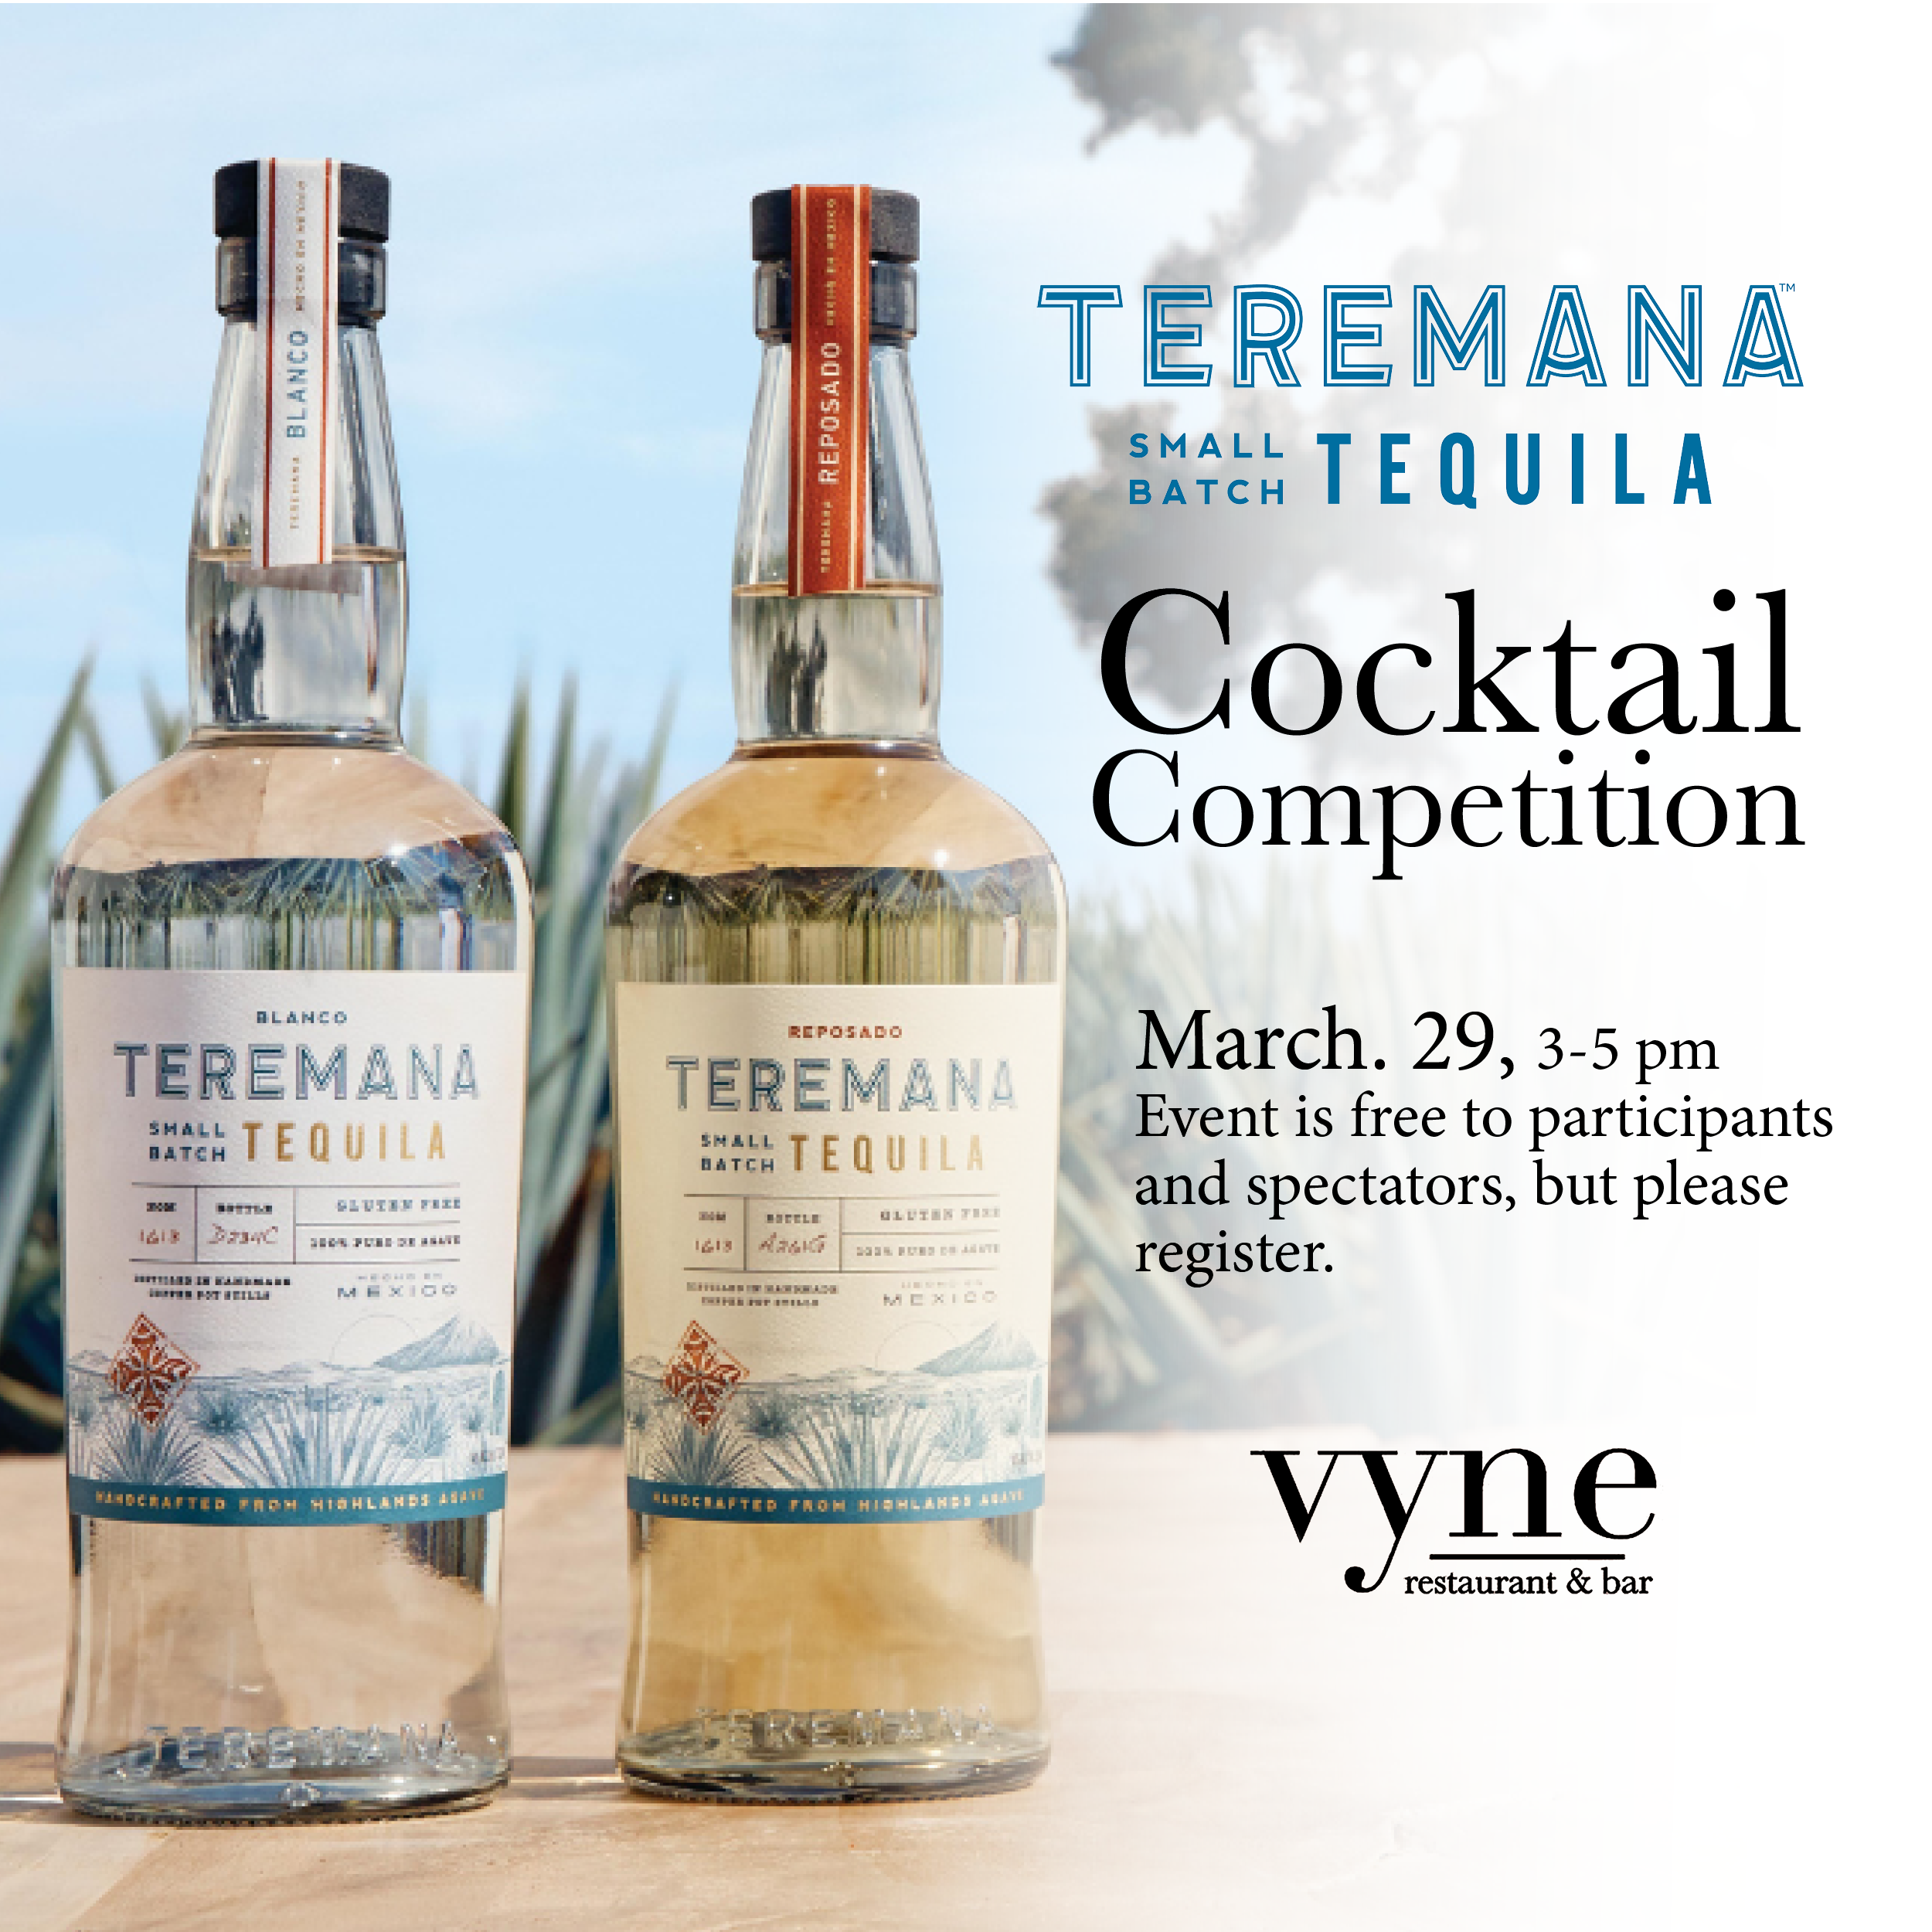 Teremana Small Batch Tequila Cocktail Competition